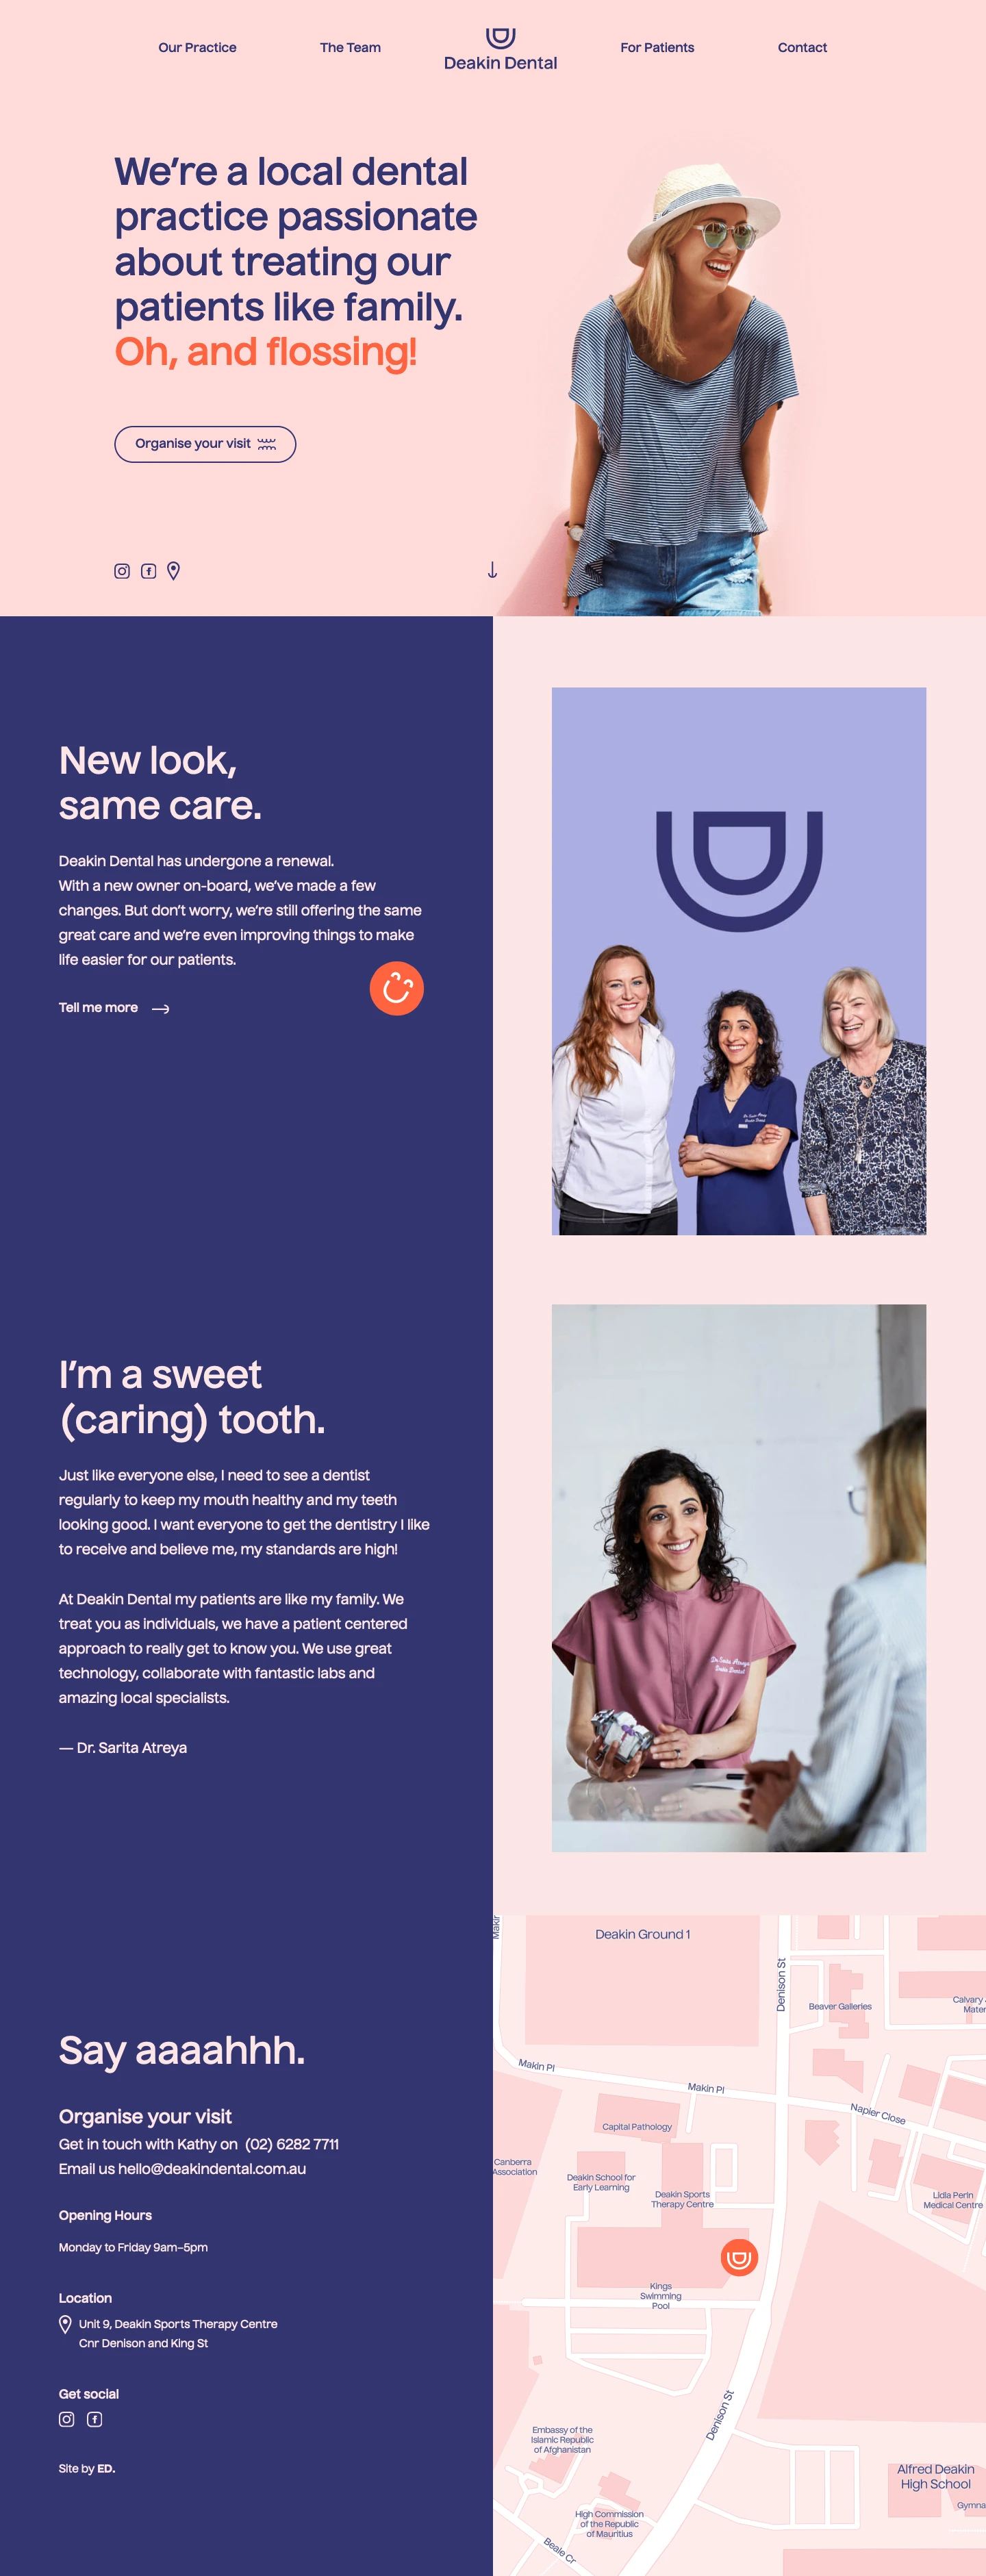 Deakin Dental Landing Page Example: We’re a local dental practice passionate about treating our patients like family.Oh, and flossing!